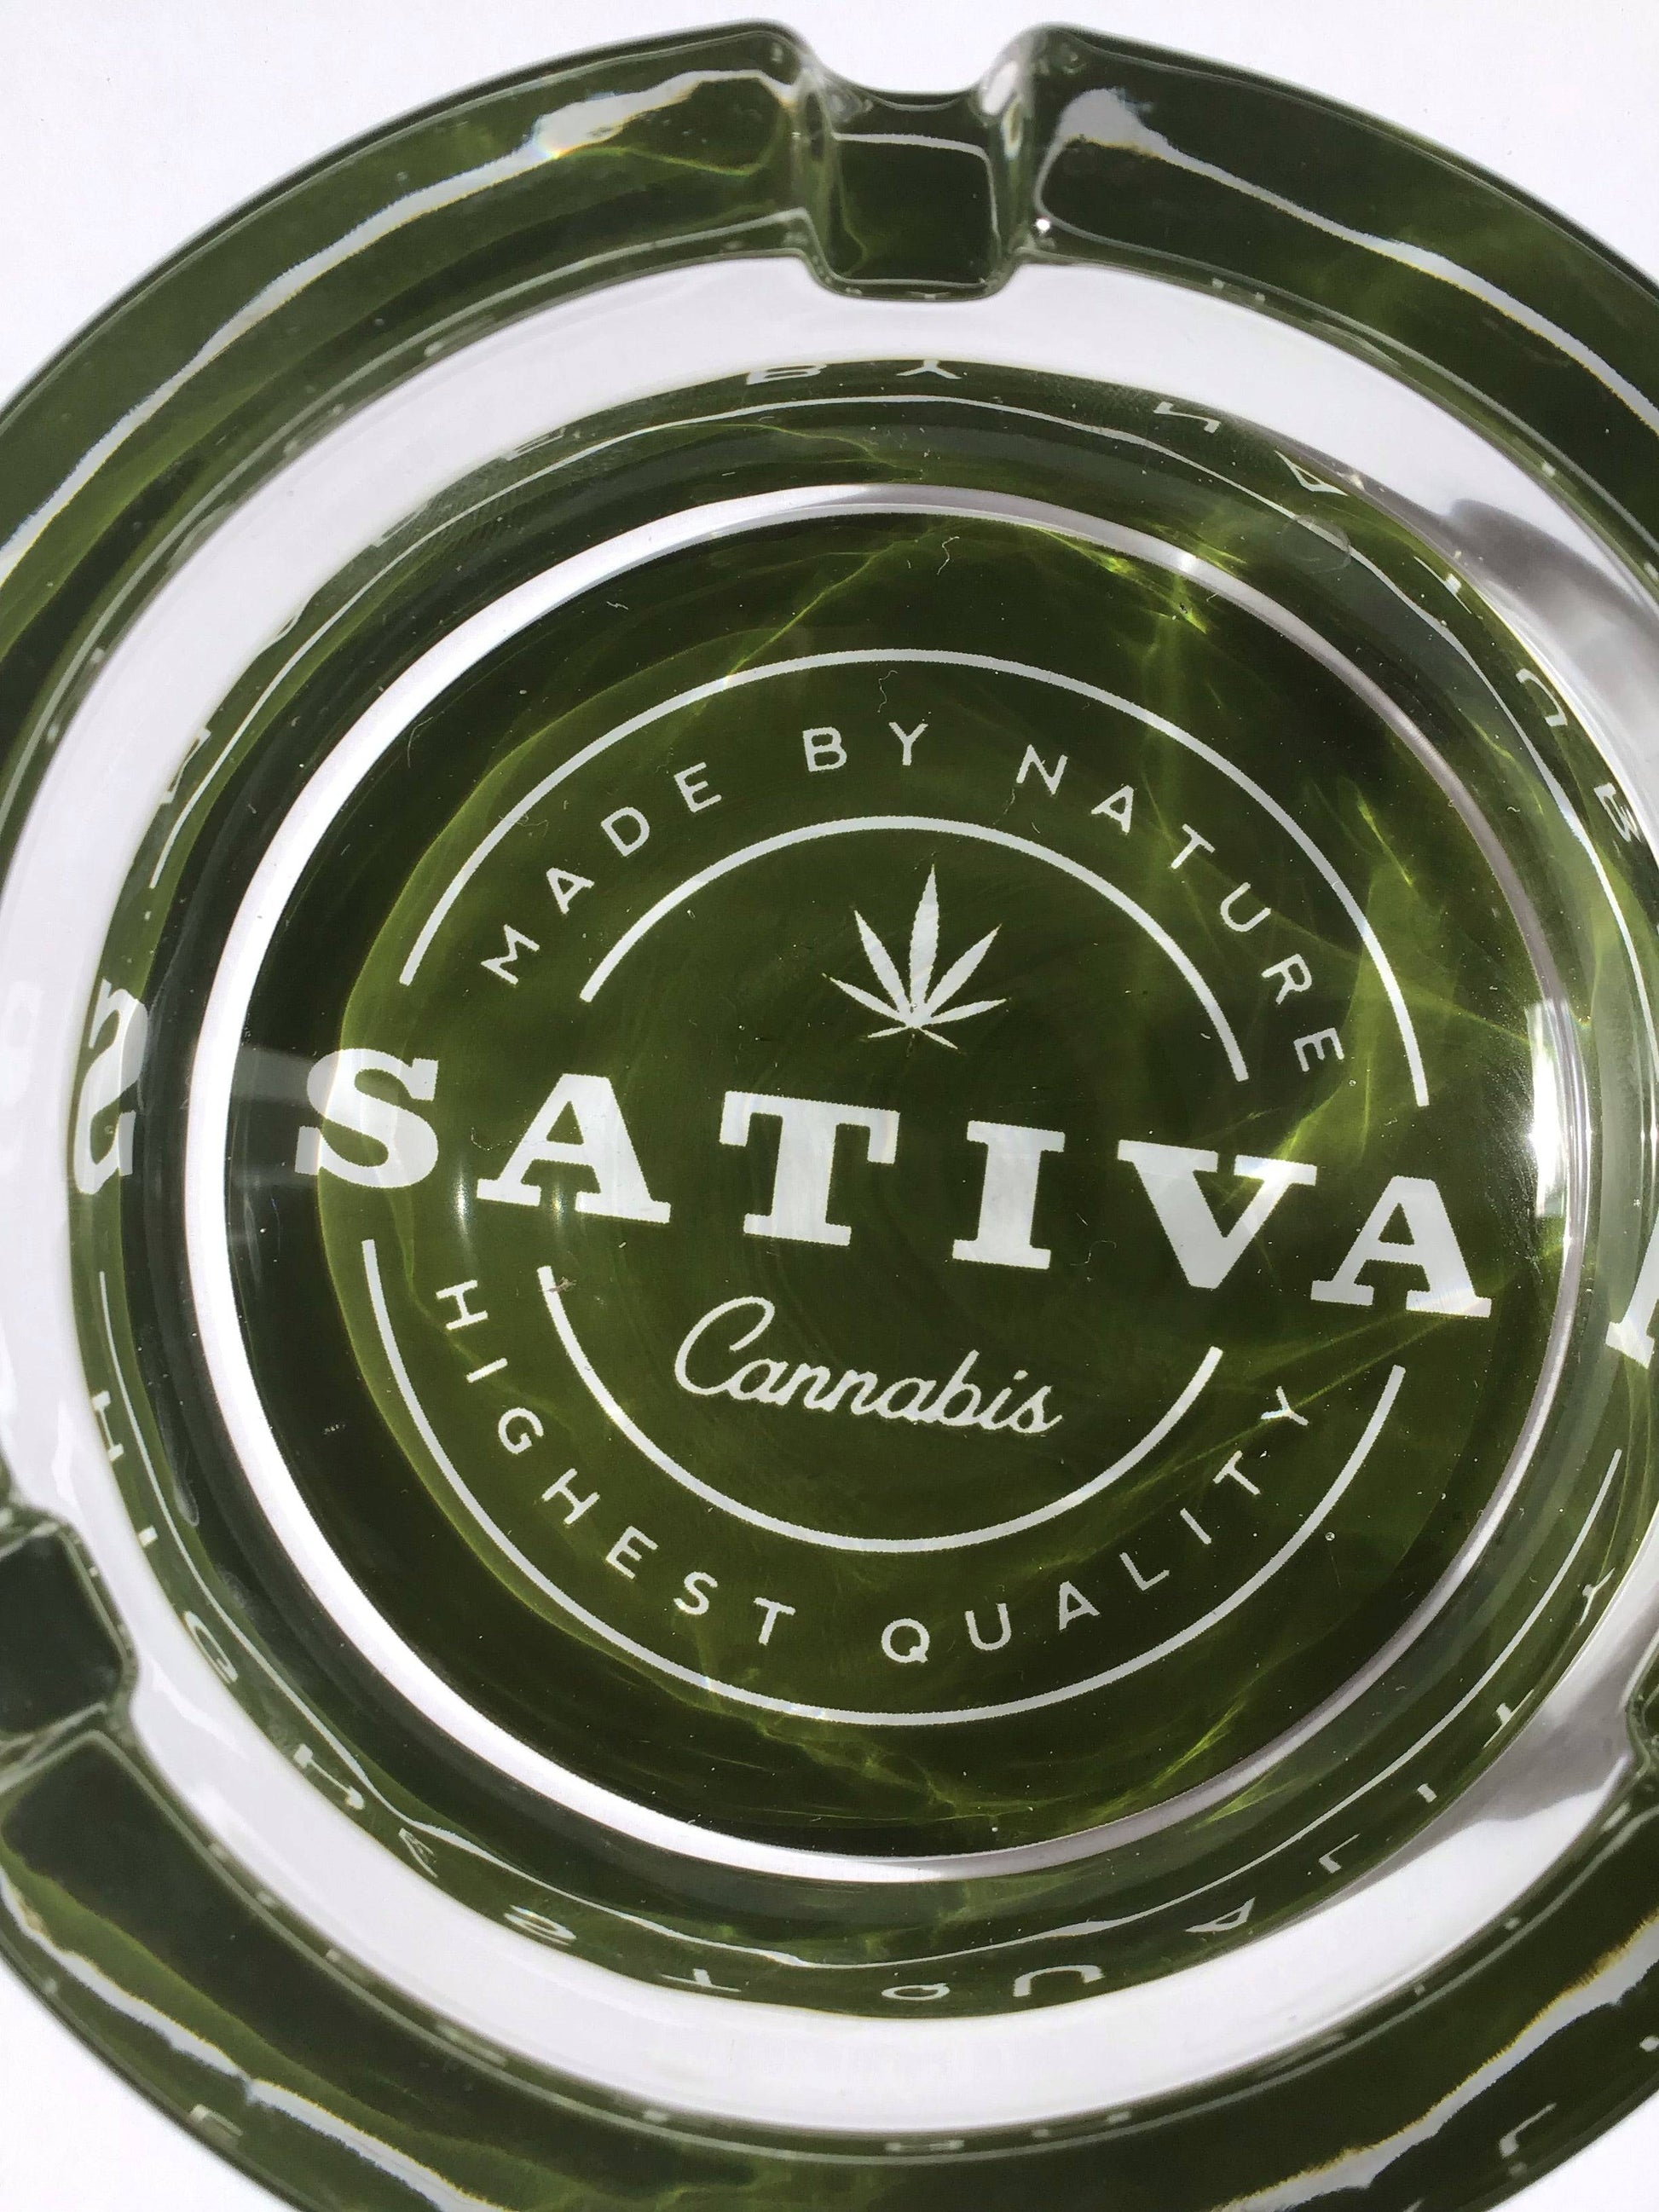 Sativa Highest Quality Design Durable Glass Ashtray yoga smokes yoga studio, delivery, delivery near me, yoga smokes smoke shop, find smoke shop, head shop near me, yoga studio, headshop, head shop, local smoke shop, psl, psl smoke shop, smoke shop, smokeshop, yoga, yoga studio, dispensary, local dispensary, smokeshop near me, port saint lucie, florida, port st lucie, lounge, life, highlife, love, stoned, highsociety. Yoga Smokes